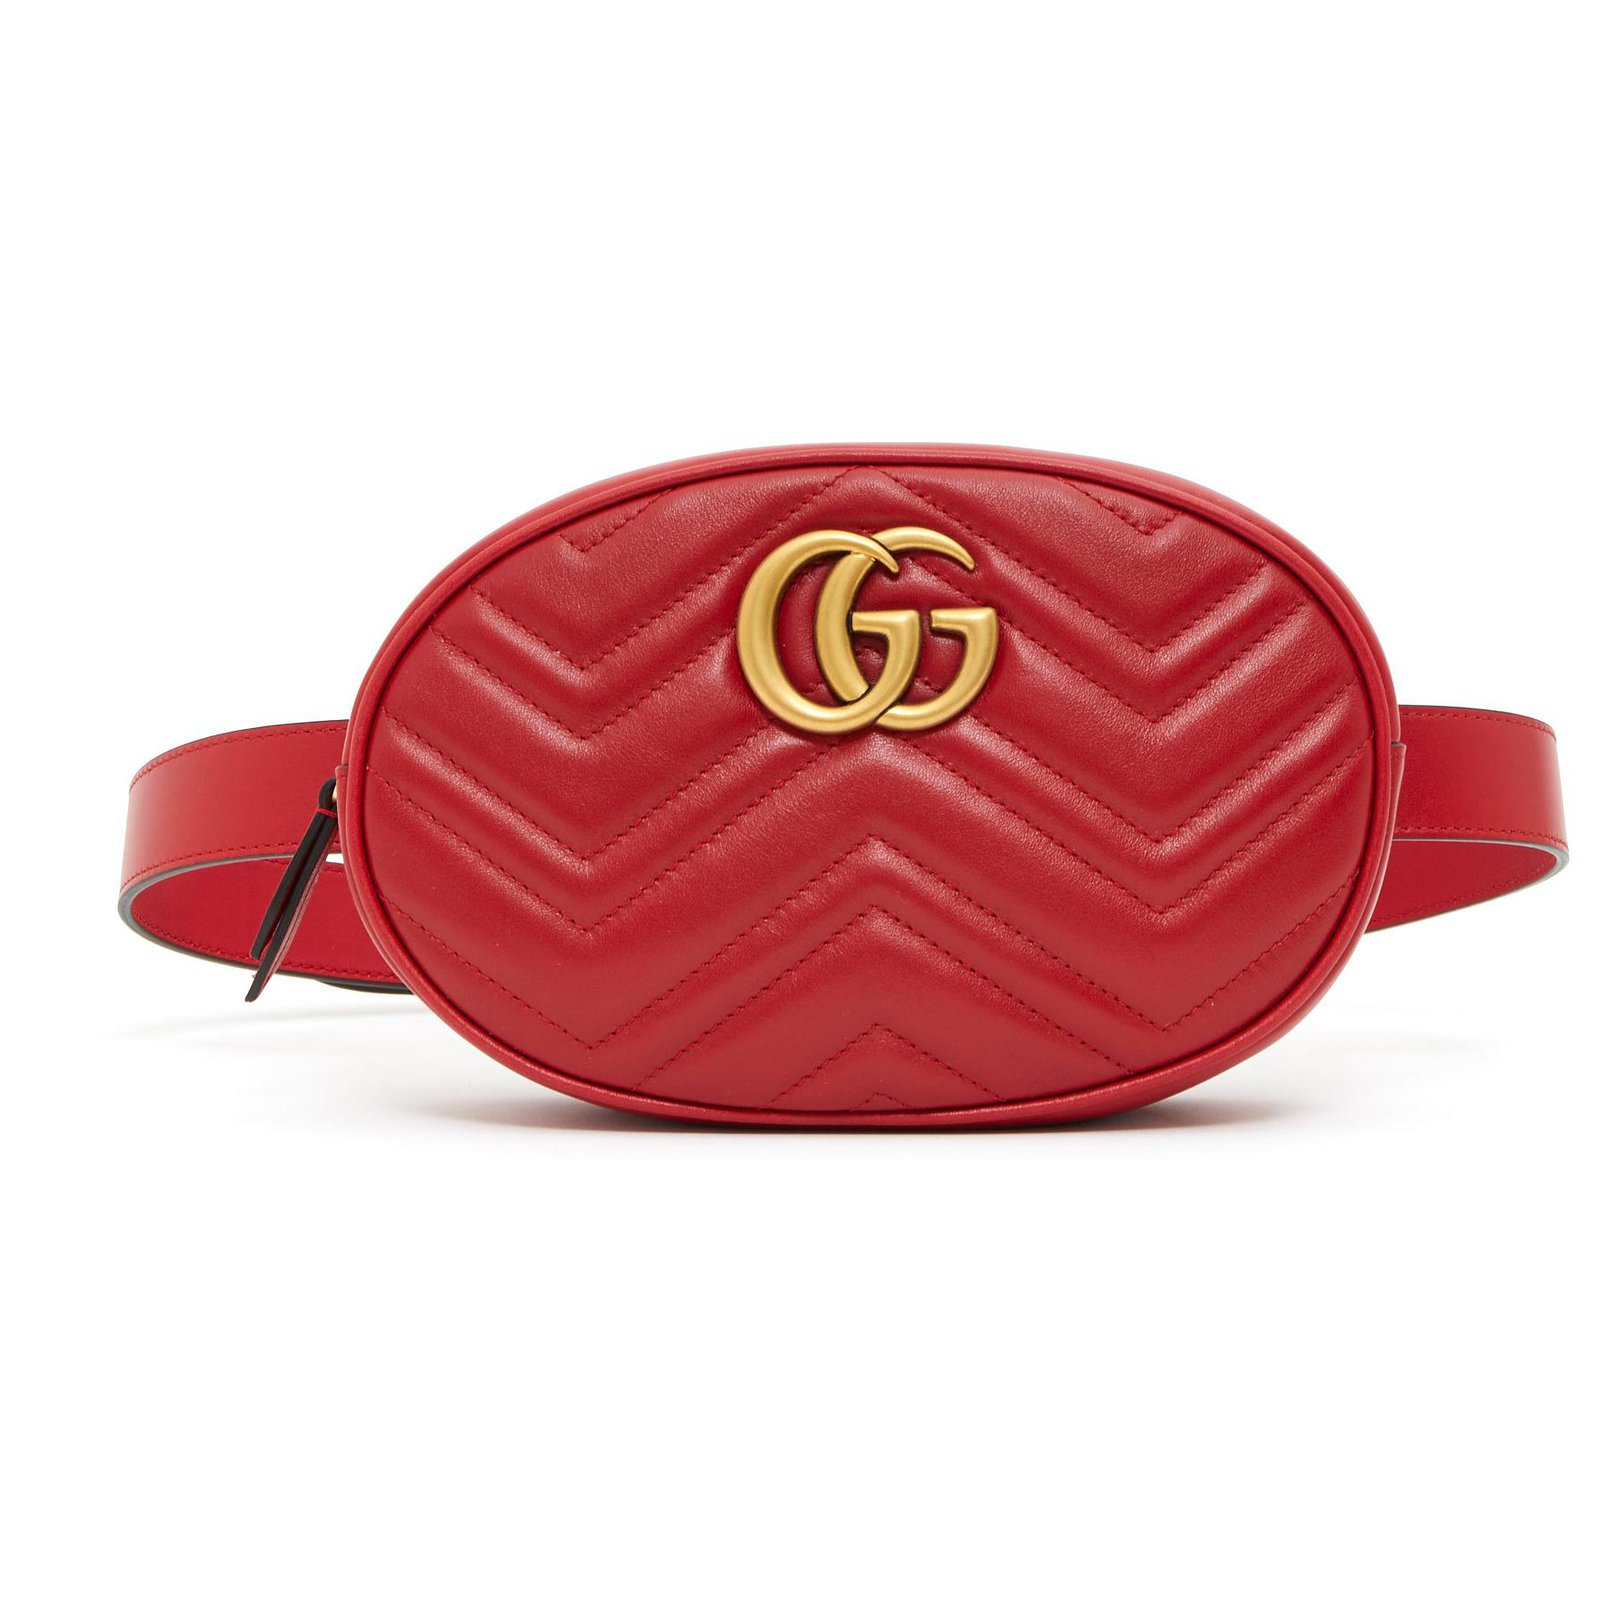 Download Gucci Soho Leather Disco Bag Red  Gucci Sling Bag Red PNG Image  with No Background  PNGkeycom